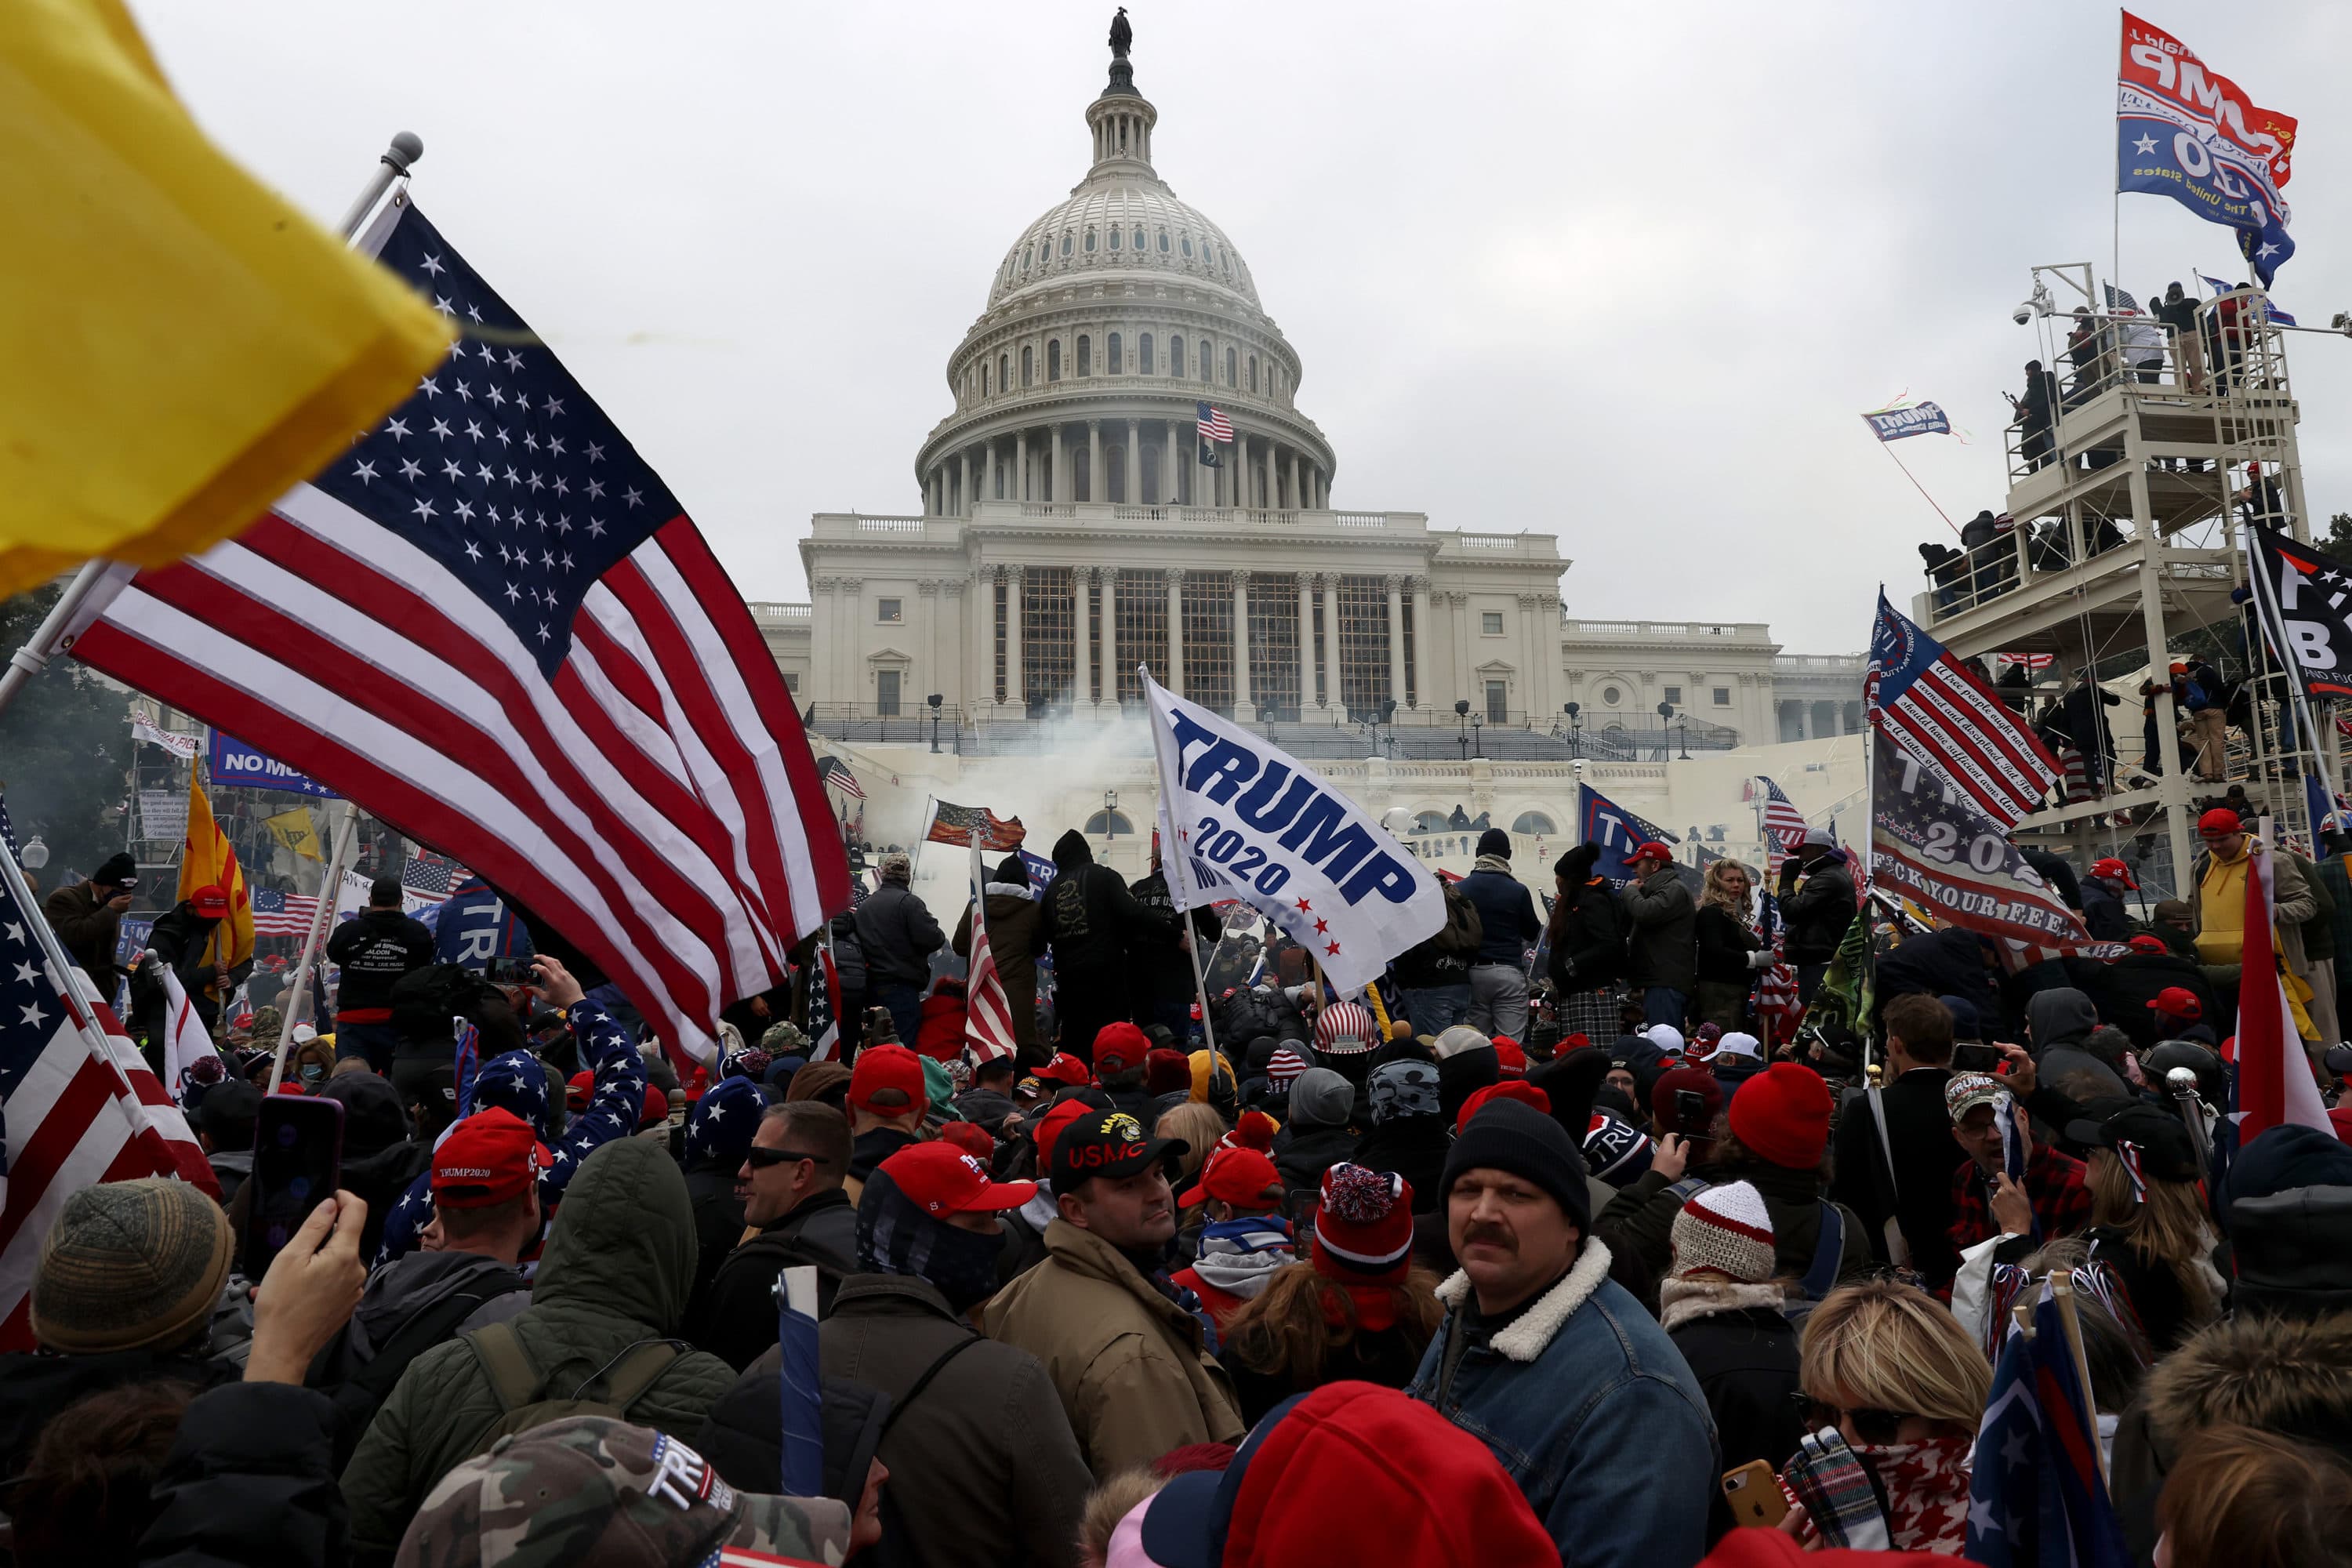 Far-right Trump supporters gather outside the U.S. Capitol Building on January 06, 2021 in Washington, DC. (Tasos Katopodis/Getty Images)